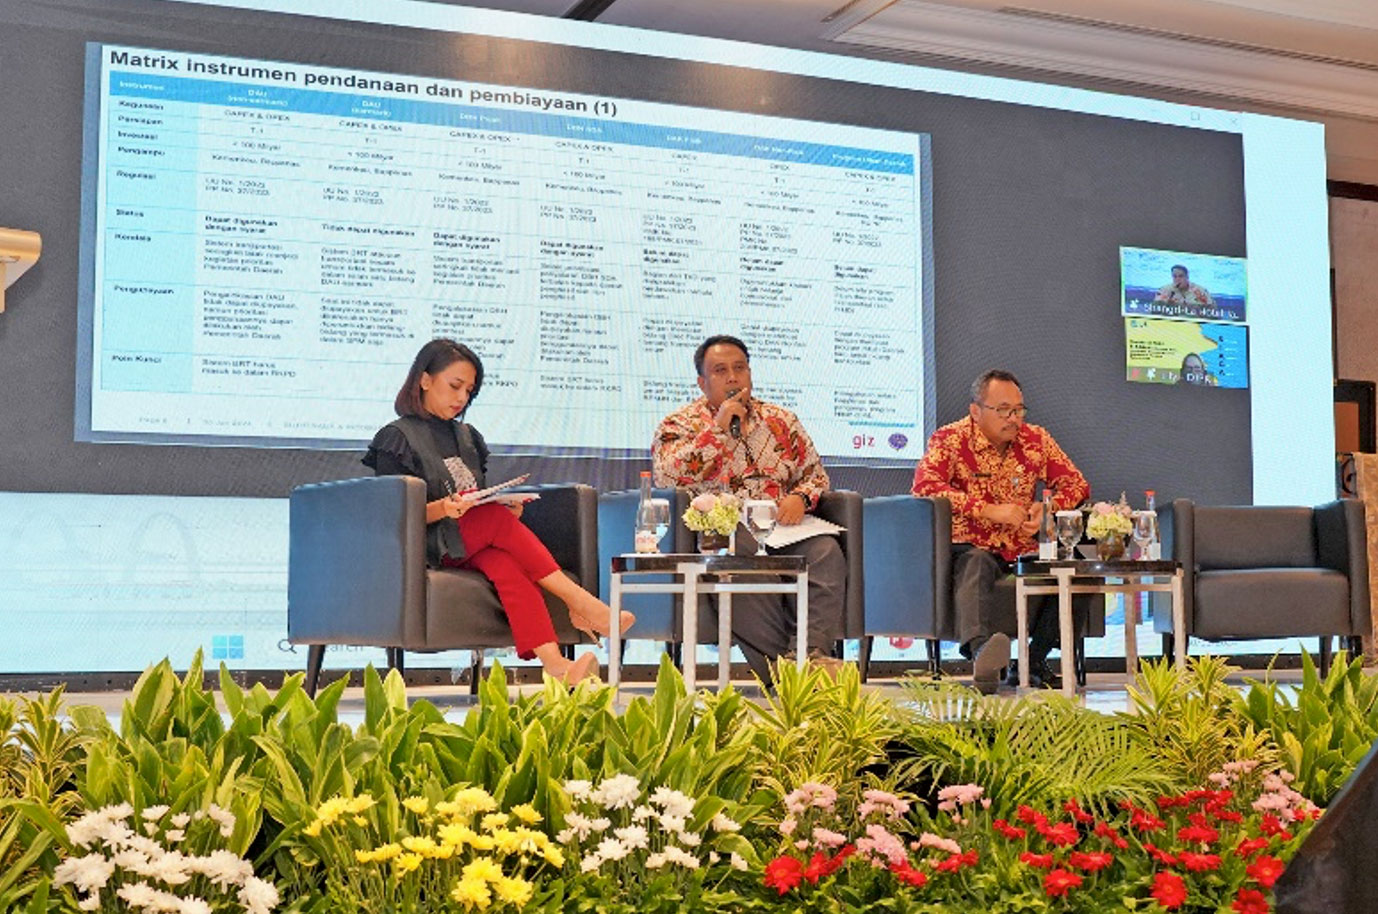 The first session of the event on the challenges faced by the regional government on public transport development with speakers from SUTRI NAMA & INDOBUS, the Ministry of Home Affairs, and the Ministry of Finance who was present online